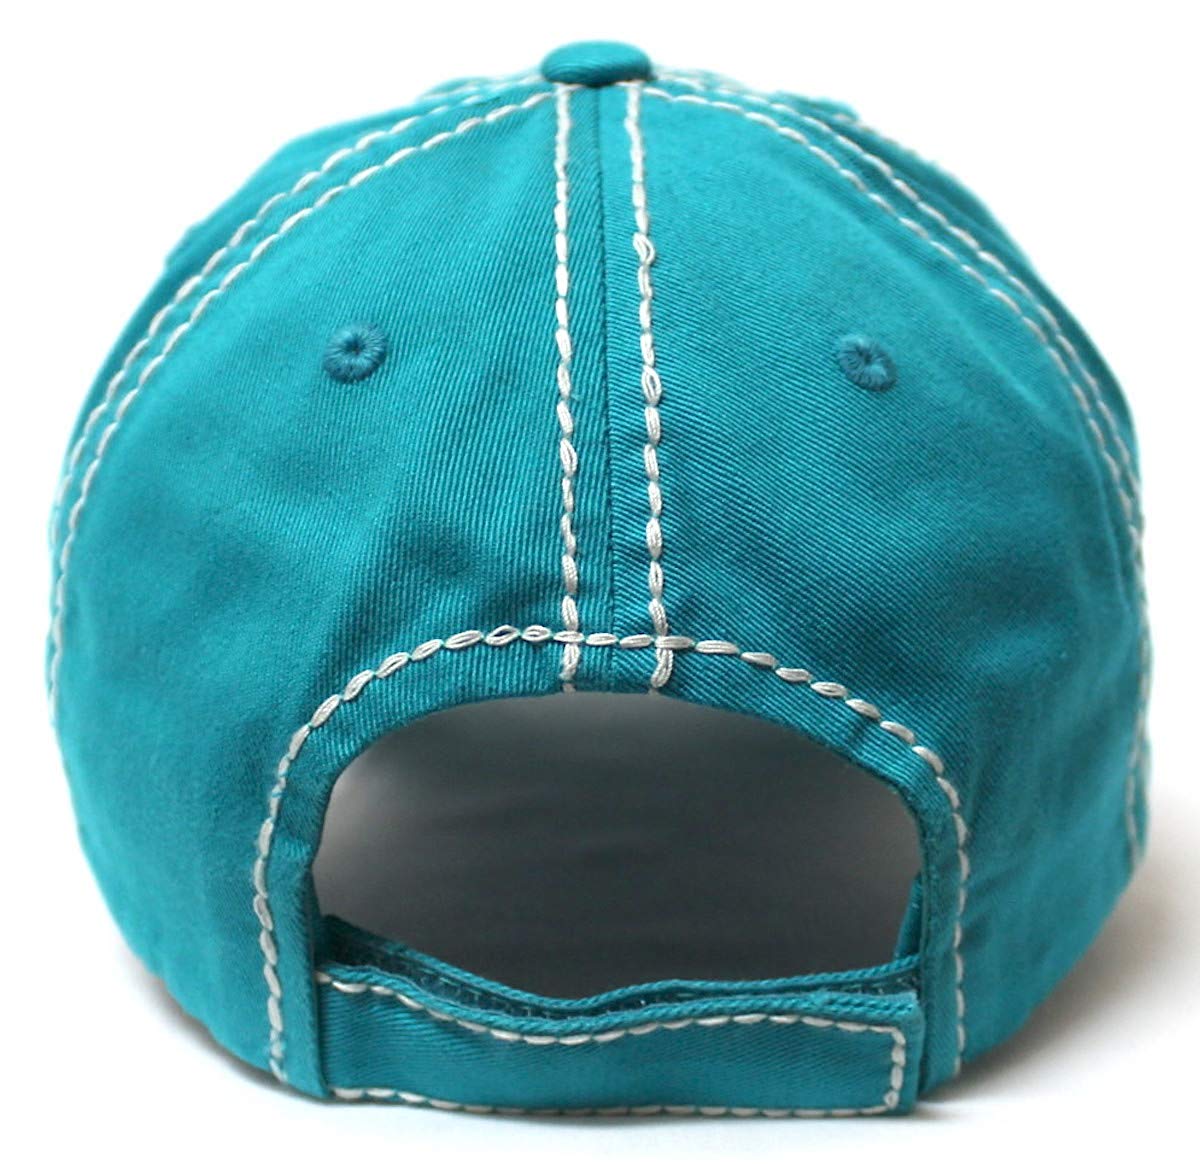 Women's Vintage Mama Graphic Cap, Spring Floral Lace Bear Embroidery, Turquoise - Caps 'N Vintage 